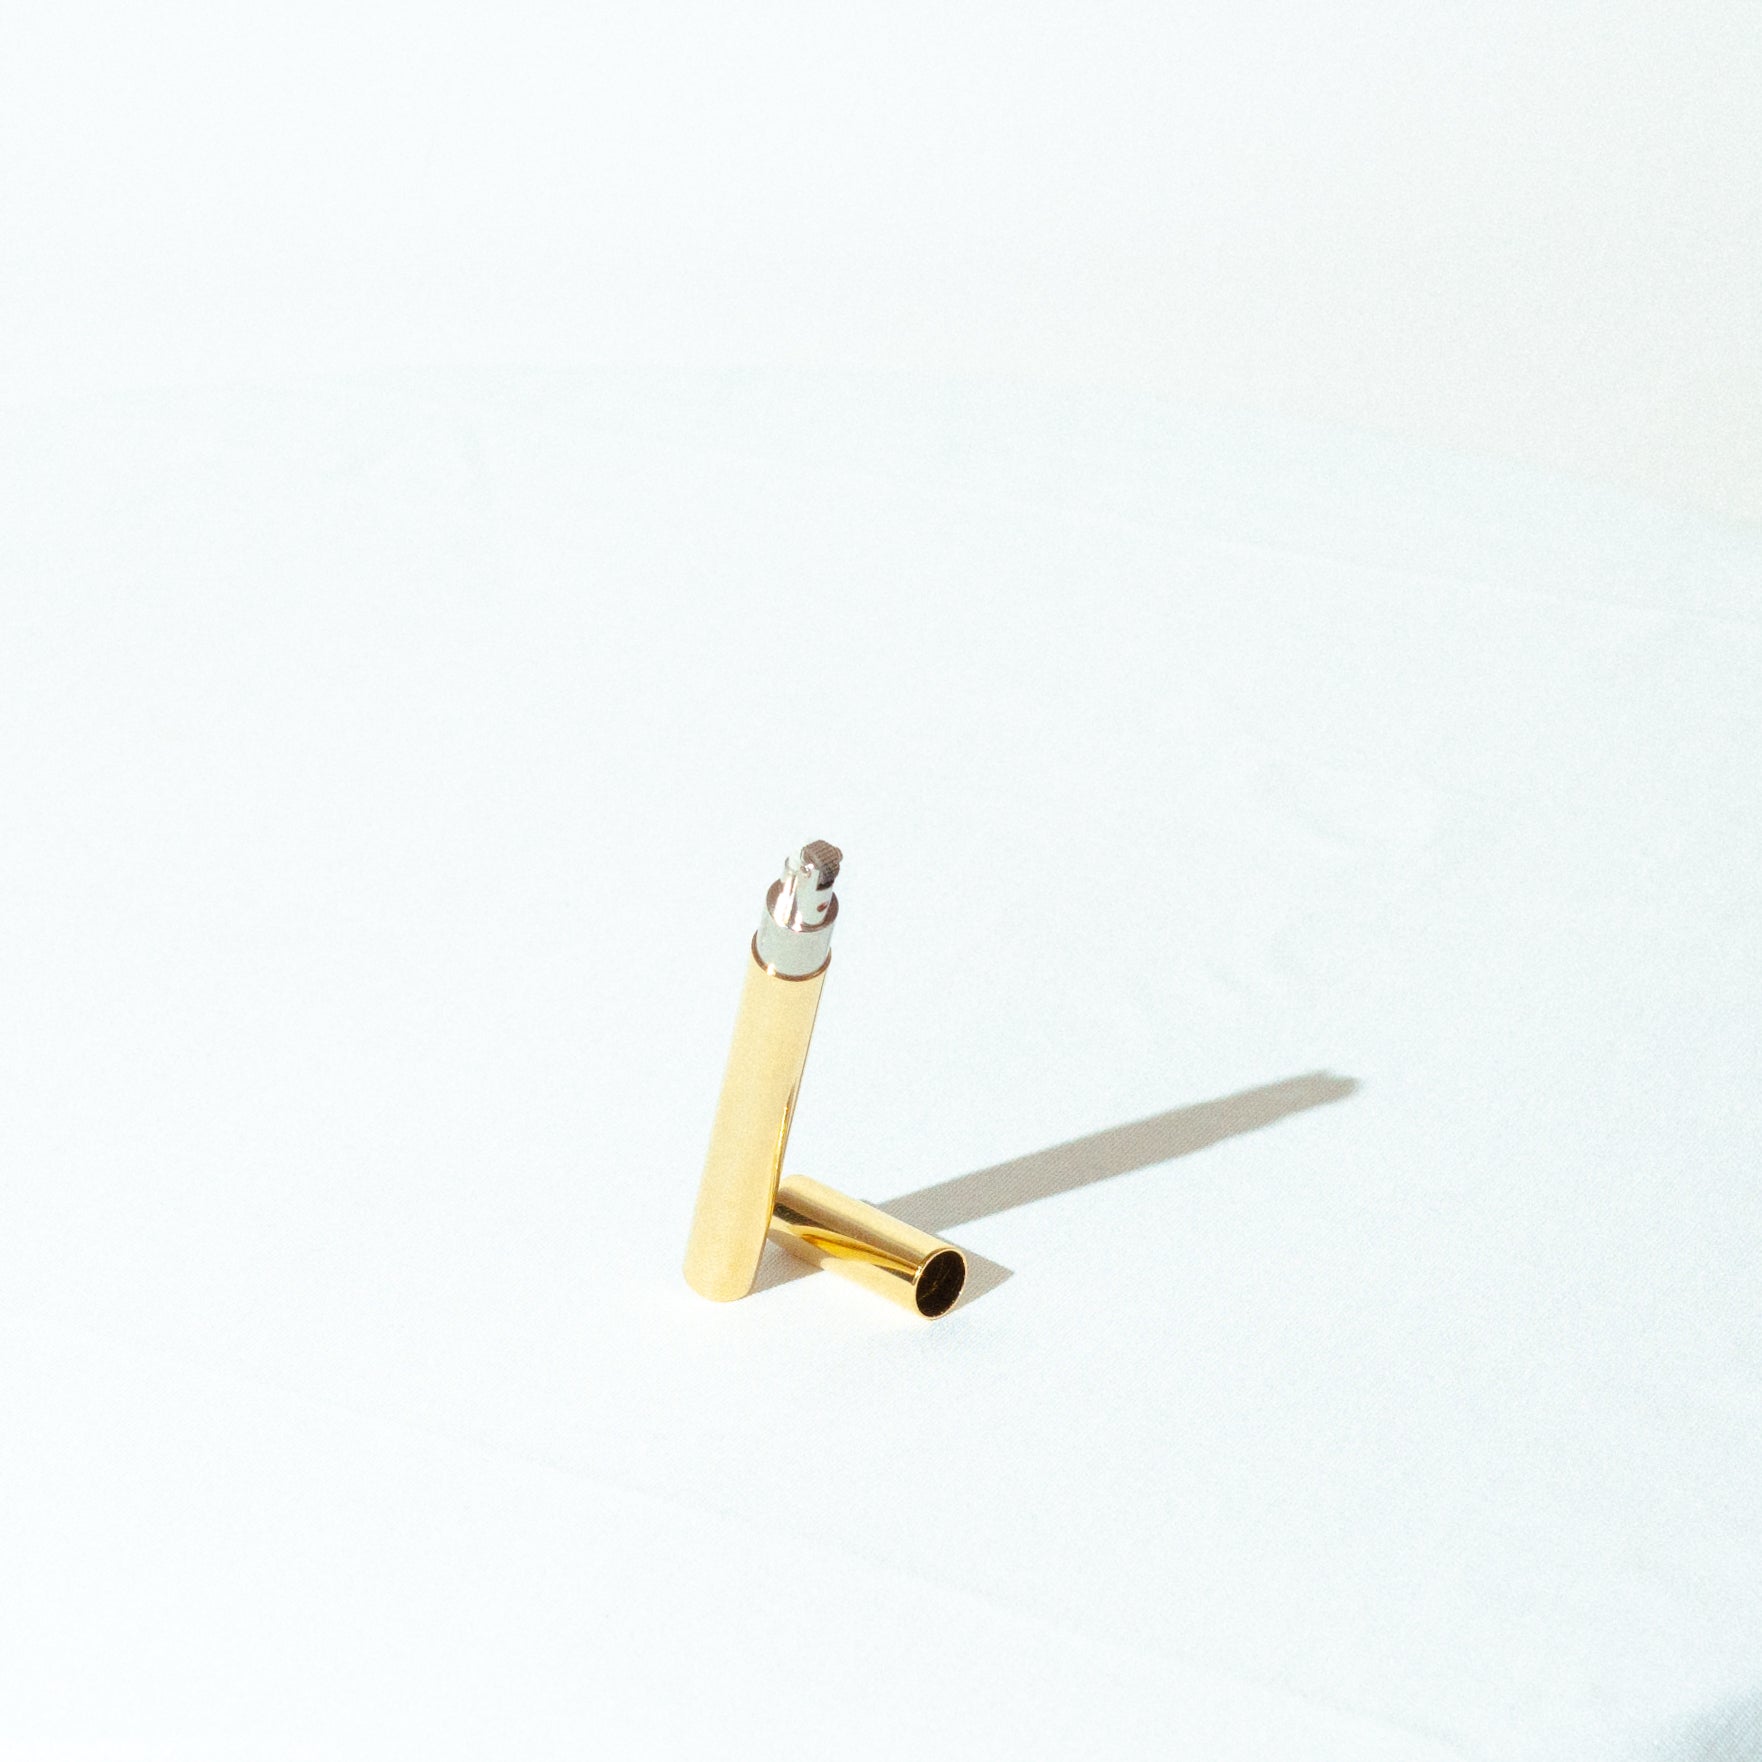 tsubota pearl luxury designer lighter in the shape of a cigarette with a brass outer